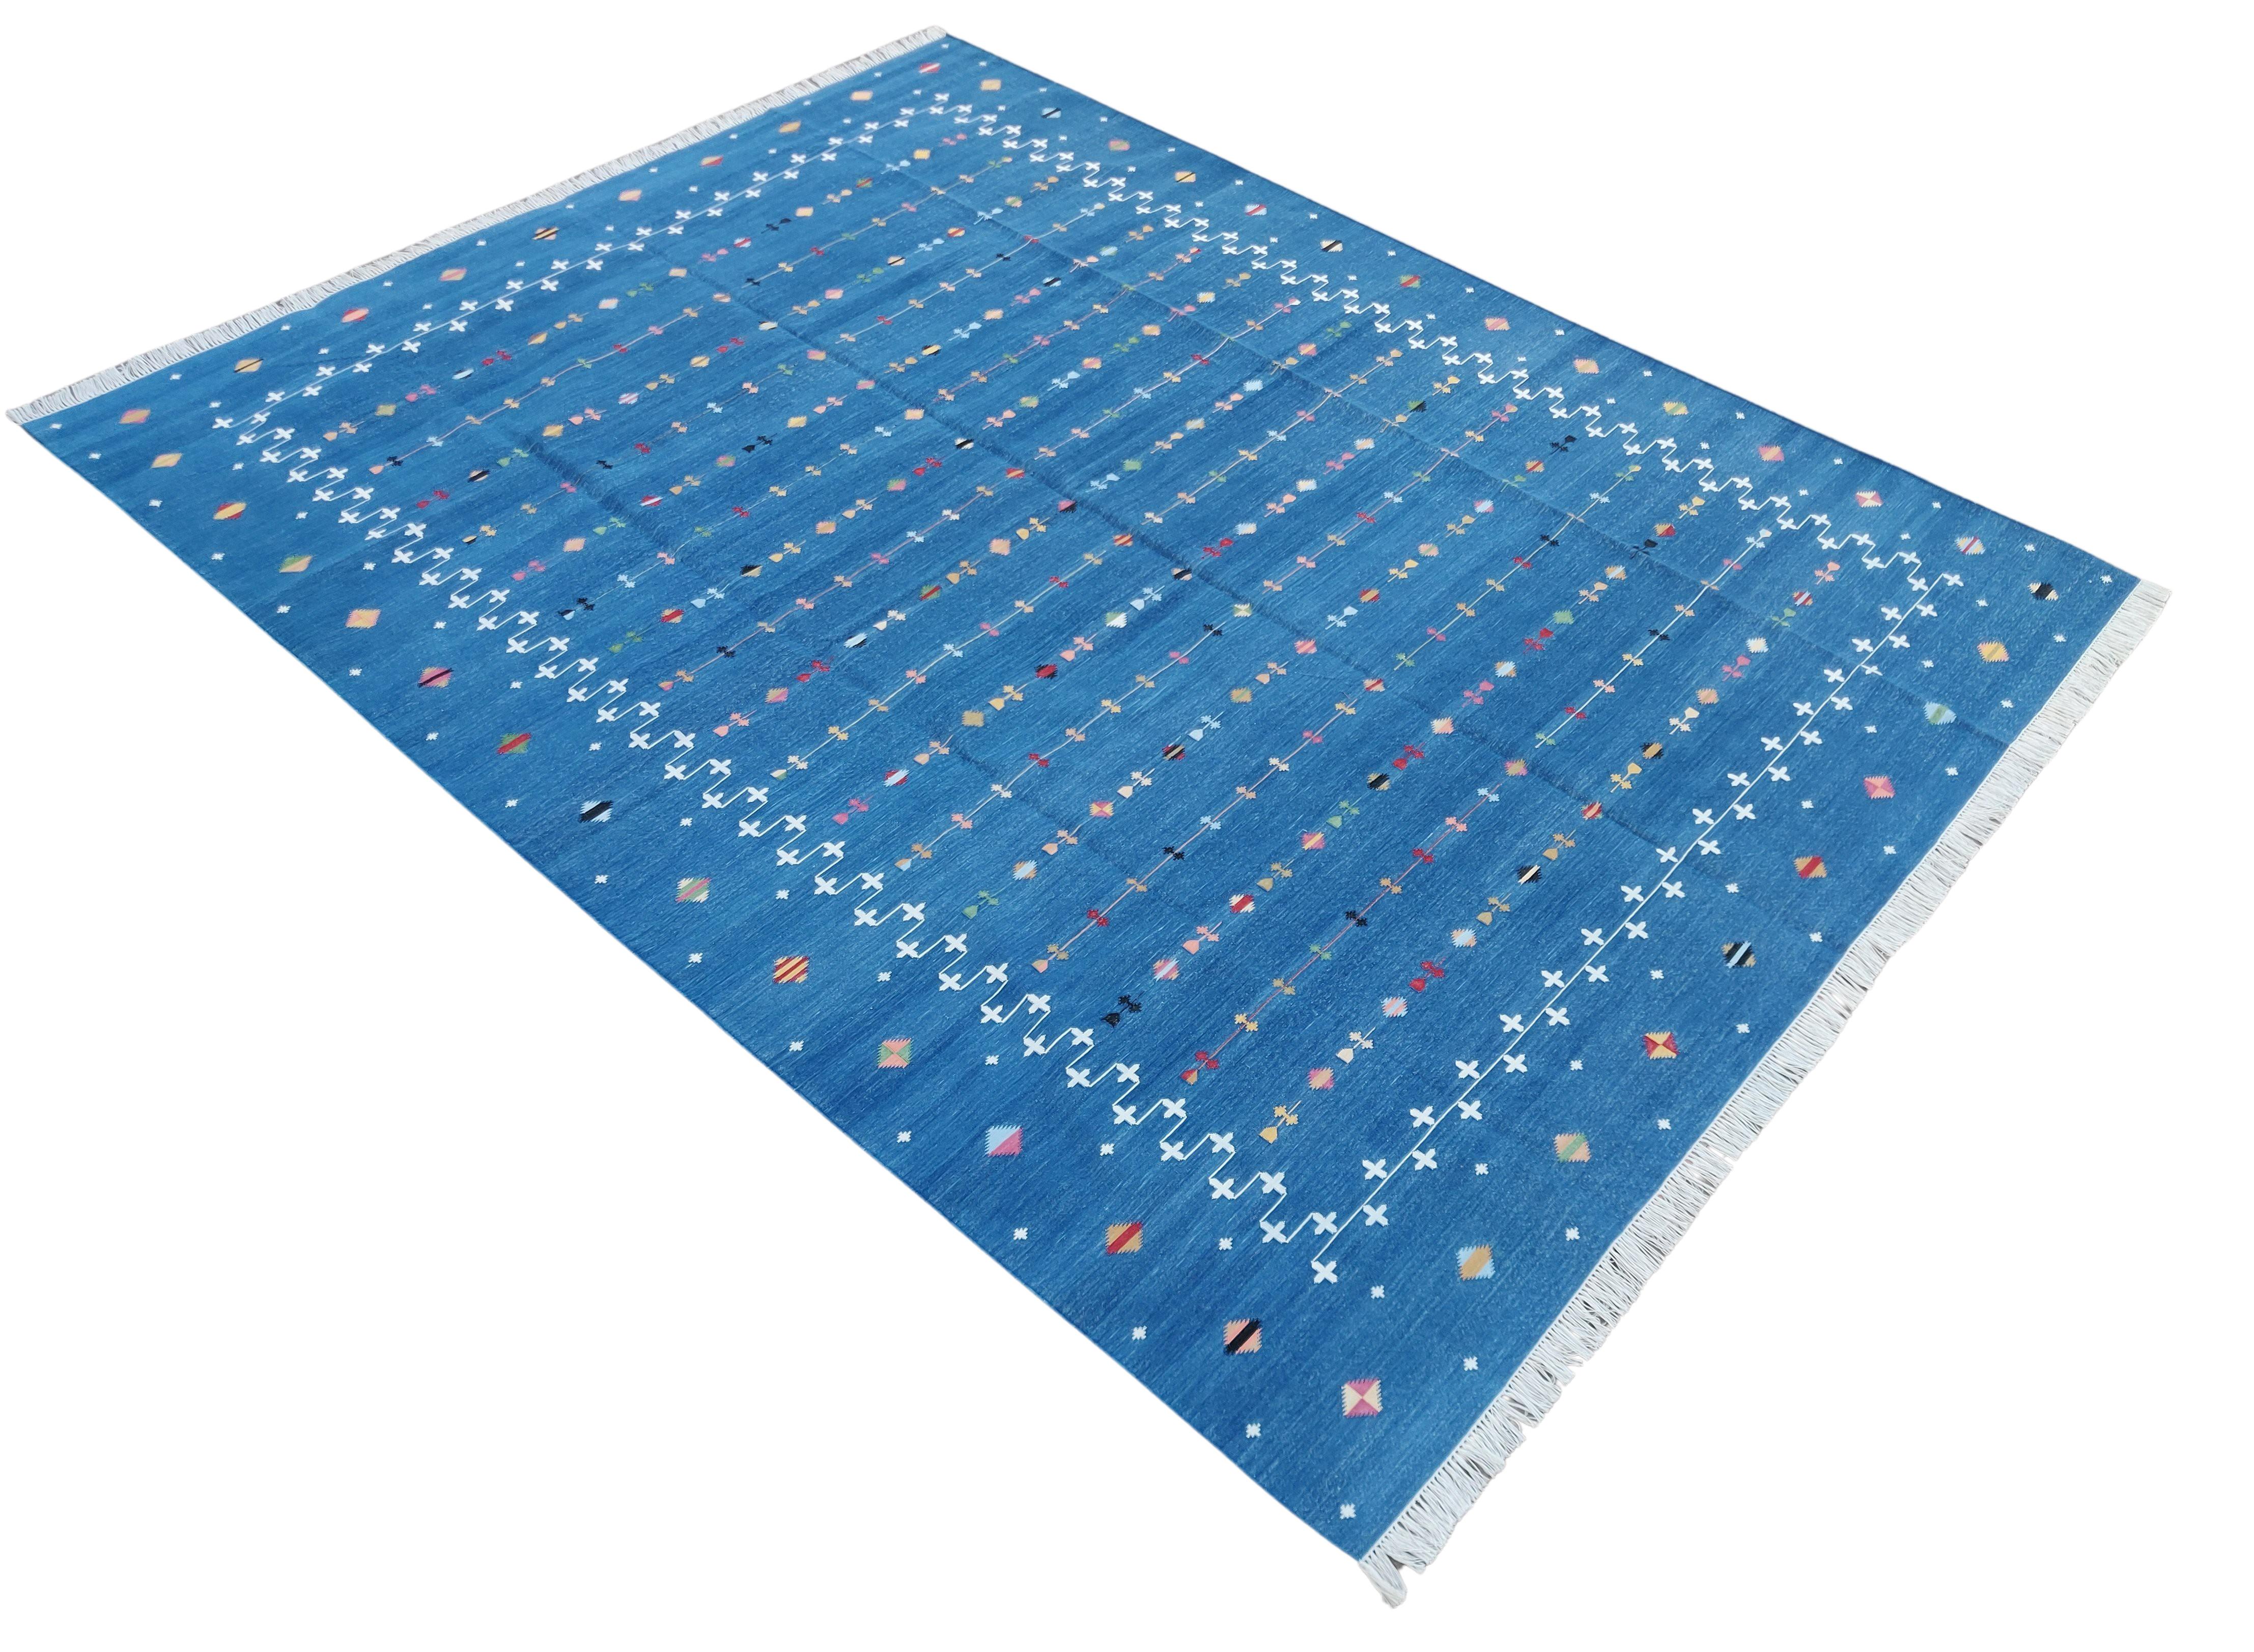 Cotton Vegetable Dyed Indigo Blue Shooting Star Rug-6'x9'
These special flat-weave dhurries are hand-woven with 15 ply 100% cotton yarn. Due to the special manufacturing techniques used to create our rugs, the size and color of each piece may vary a